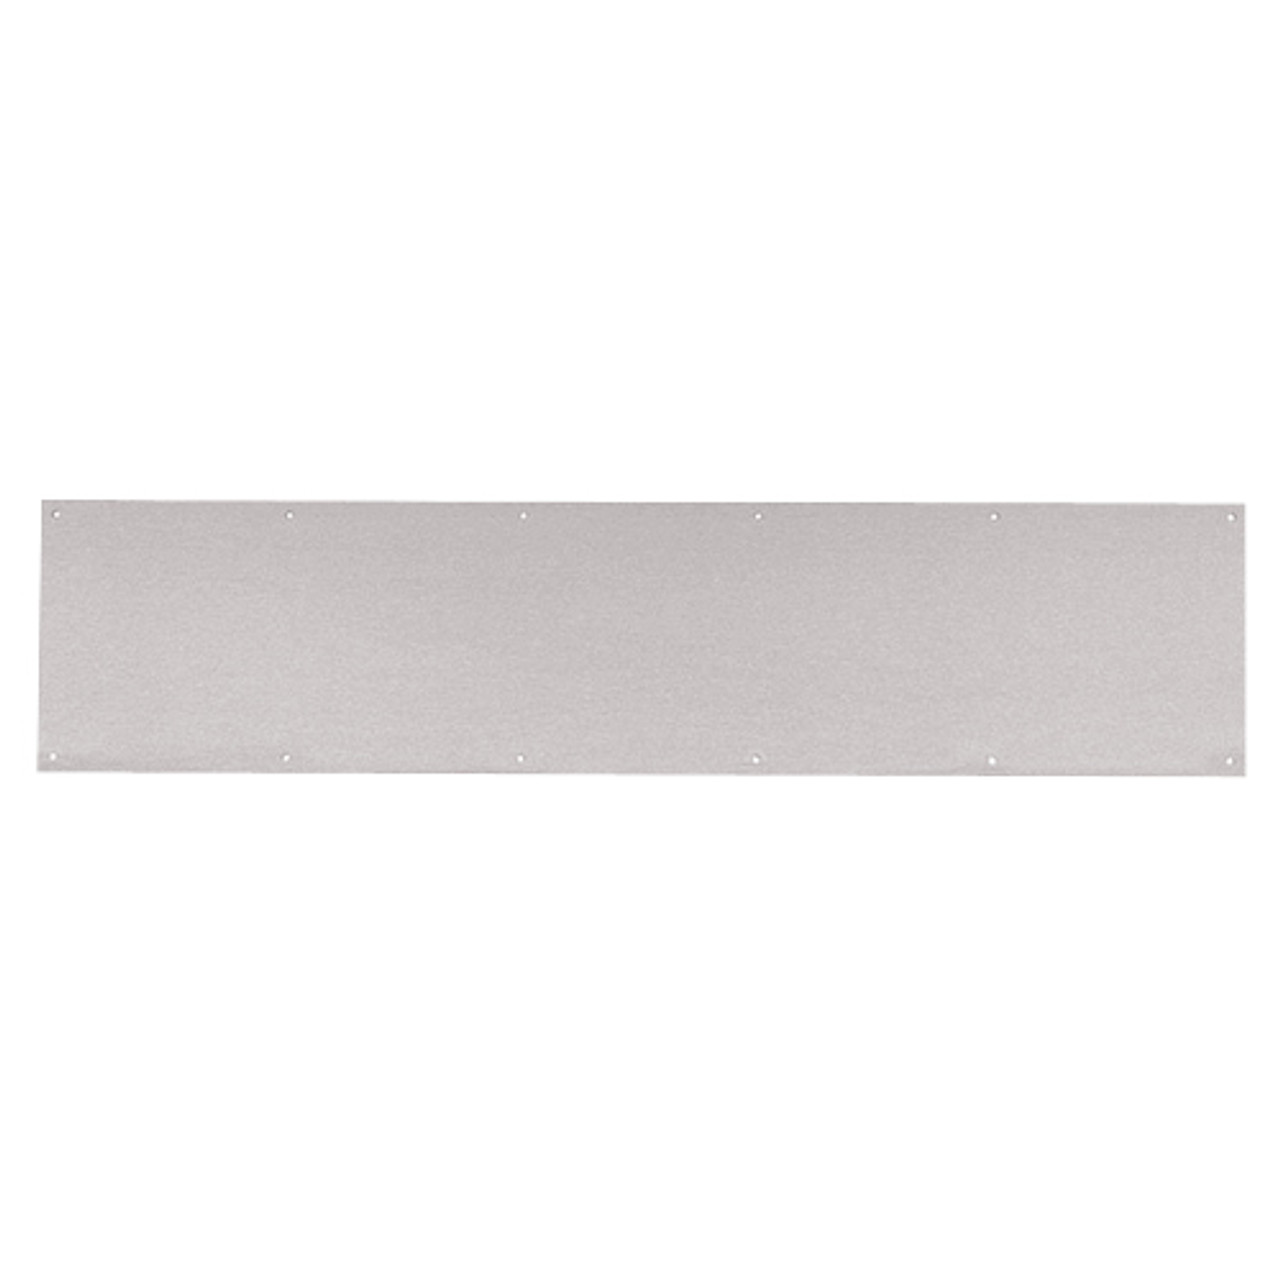 8400-US32D-44x36-B-CS Ives 8400 Series Protection Plate in Satin Stainless Steel